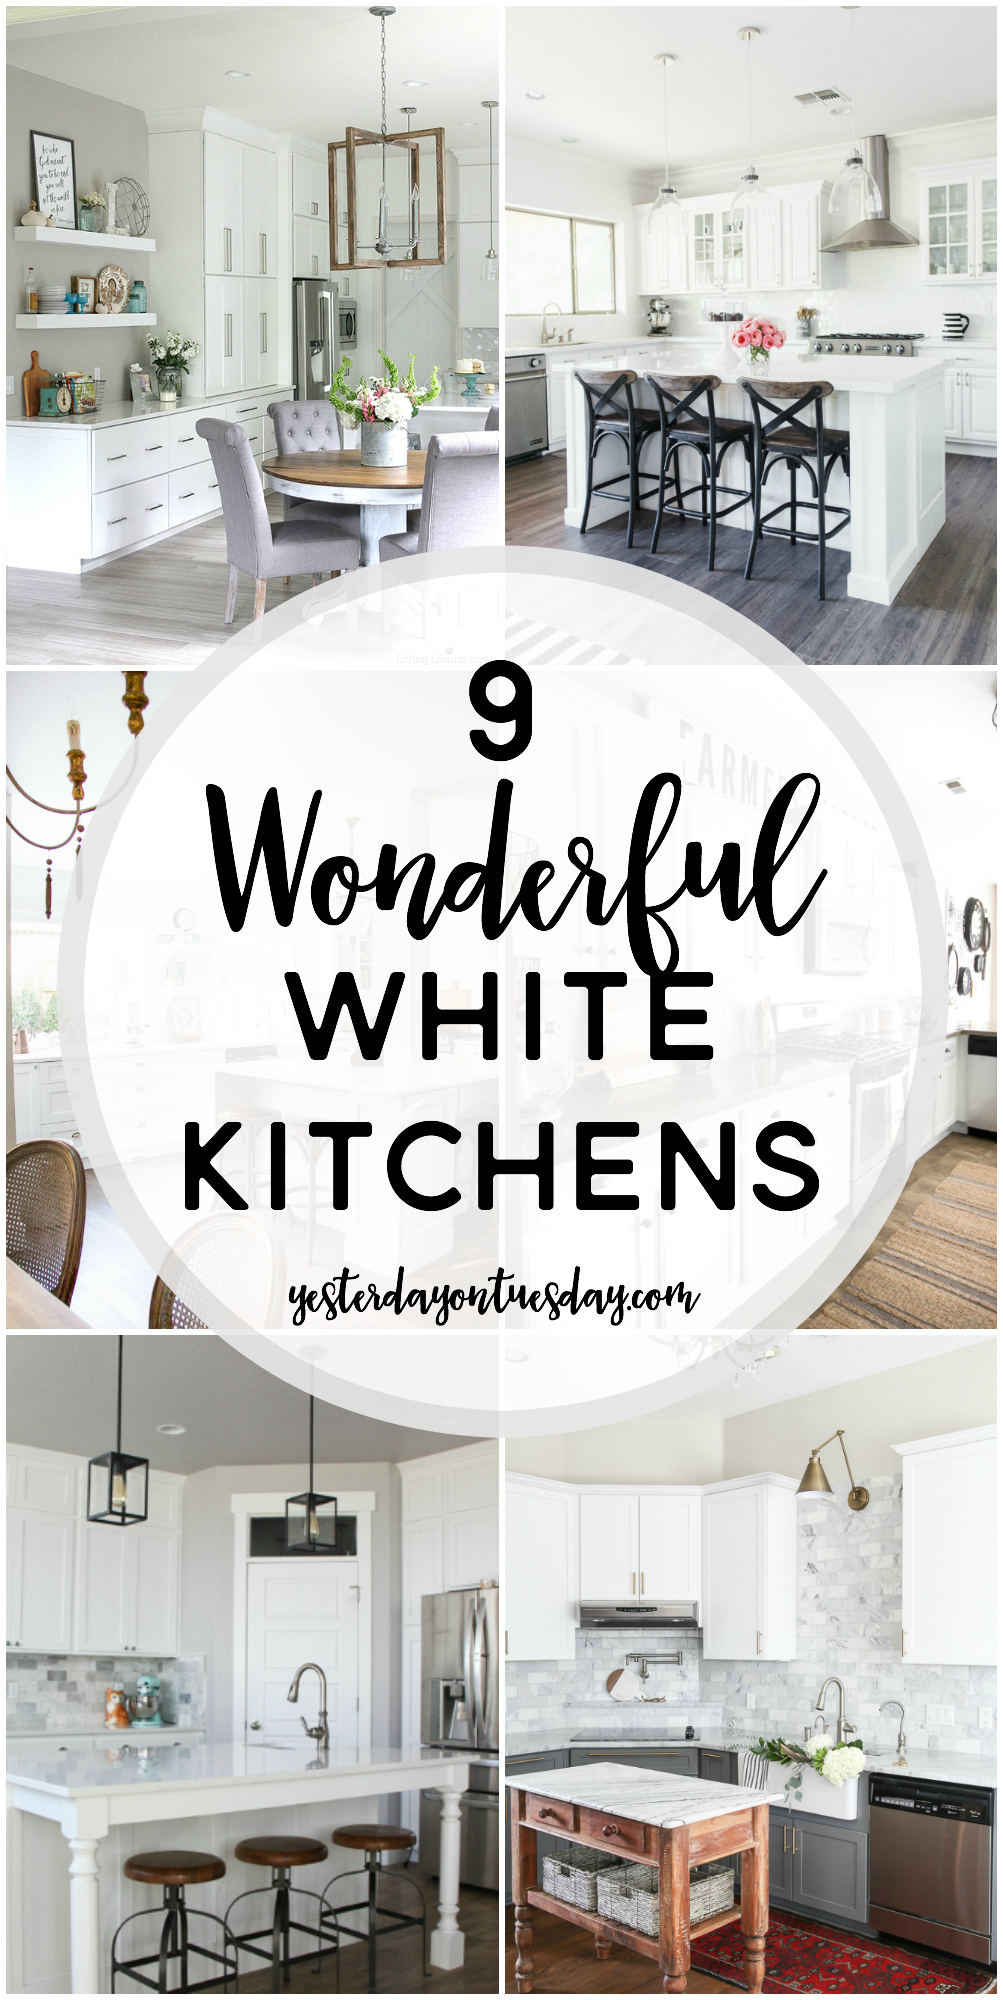 9 Wonderful White Kitchens: A collection if dreamy white kitchens with touches of industrial, modern farmhouse, fixer upper style and more. Tons of inspiring ideas.